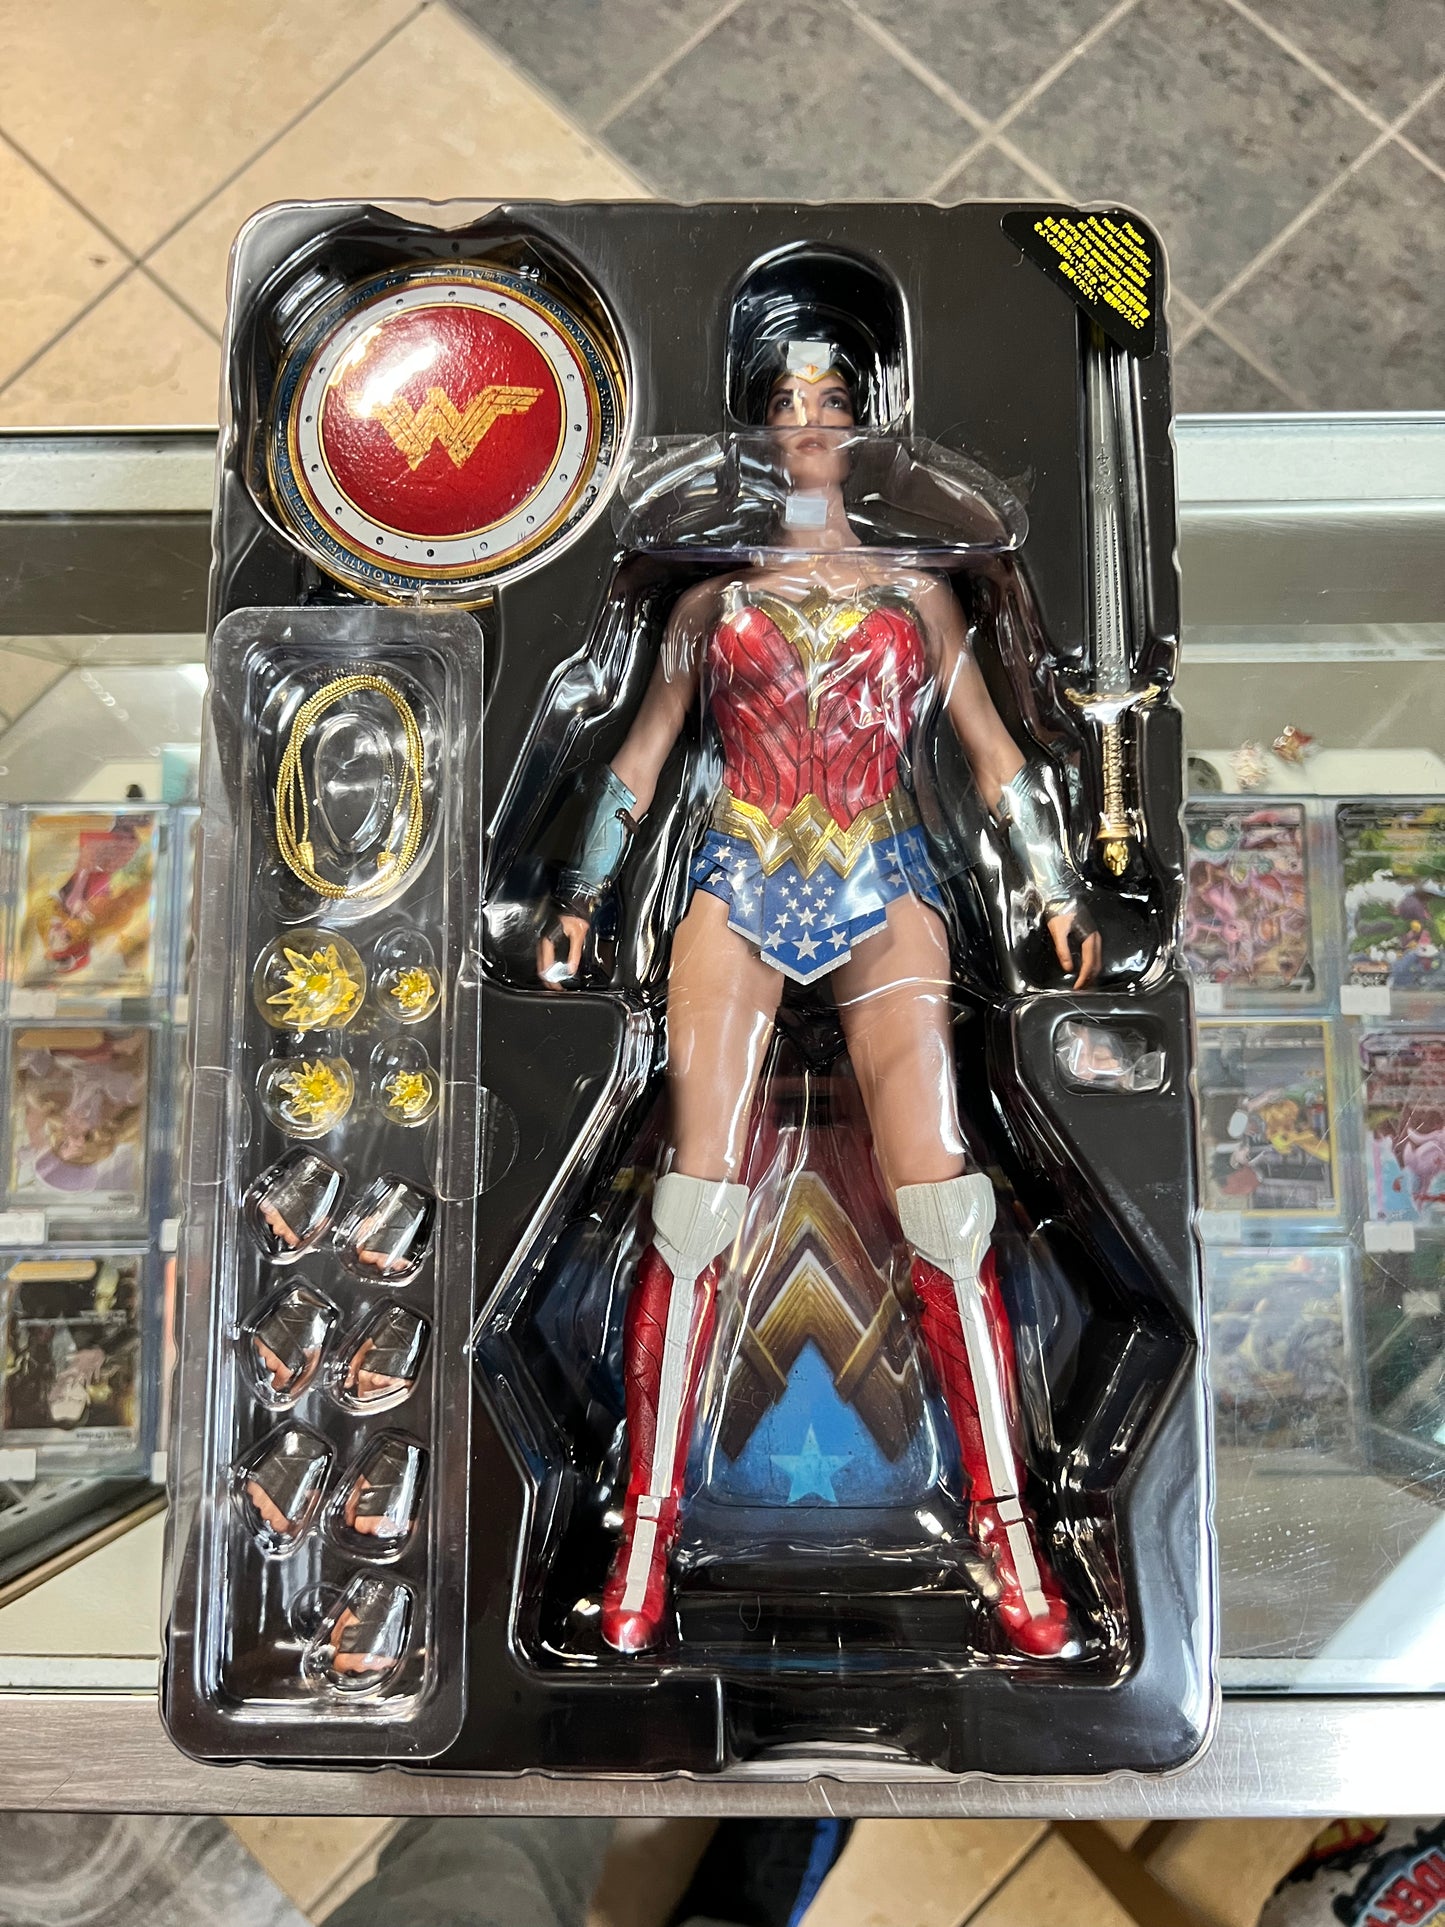 Hot Toys - Justice League - Wonder Woman - MMS506 - Sideshow Exclusive - Comic Concept Edition - (OPEN BOX-USED)